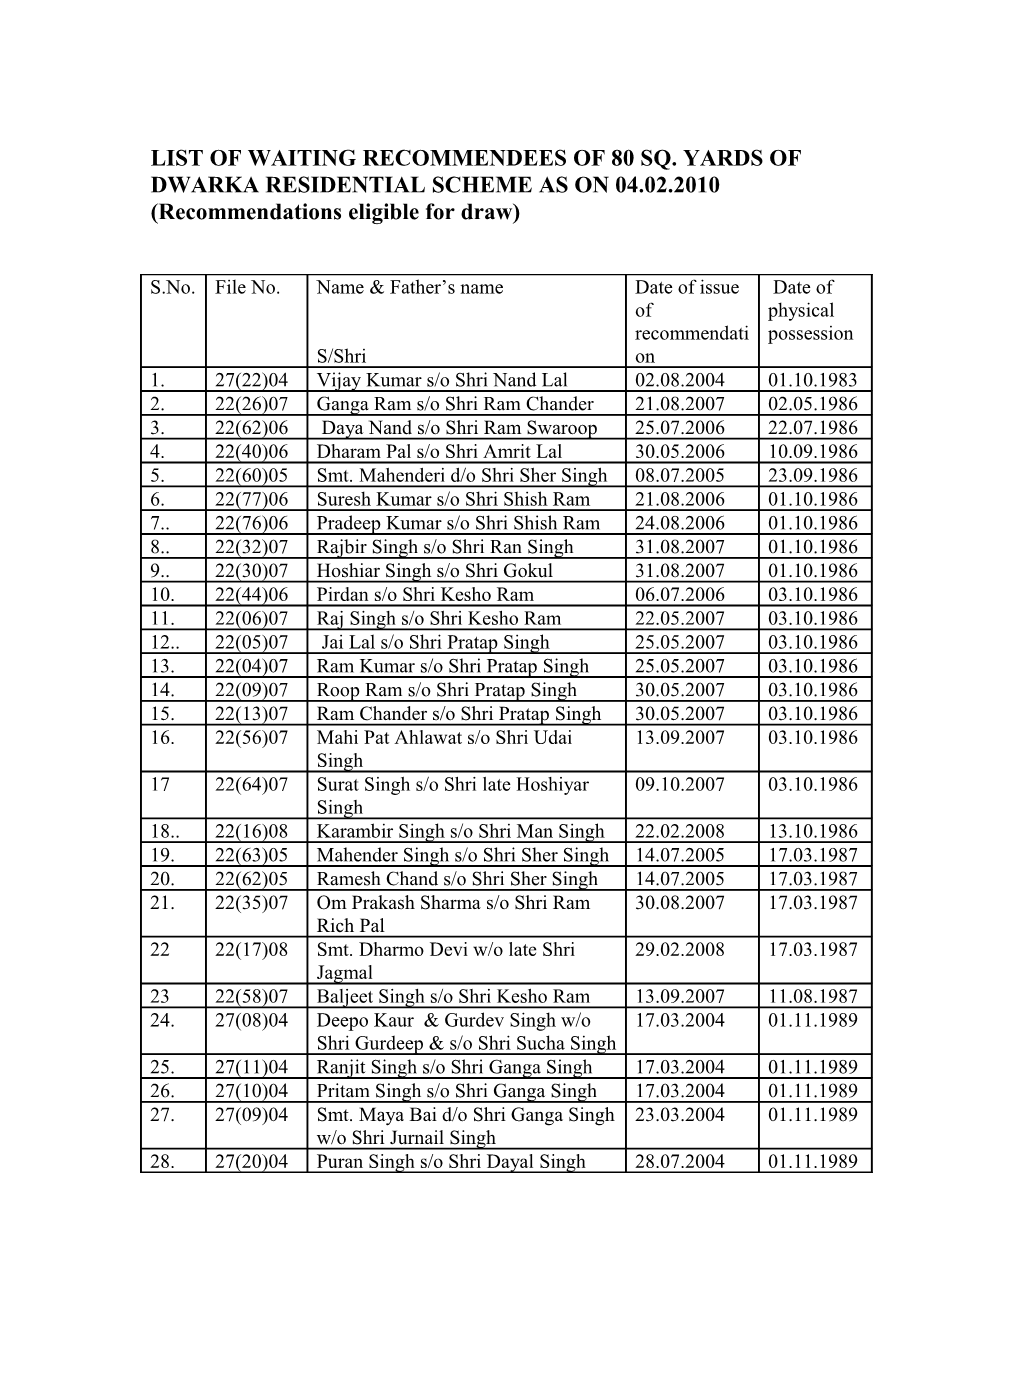 List of Waiting Recommendees of 80 Sq. Yards of Dwarka Residential Scheme As on 04.02.2010